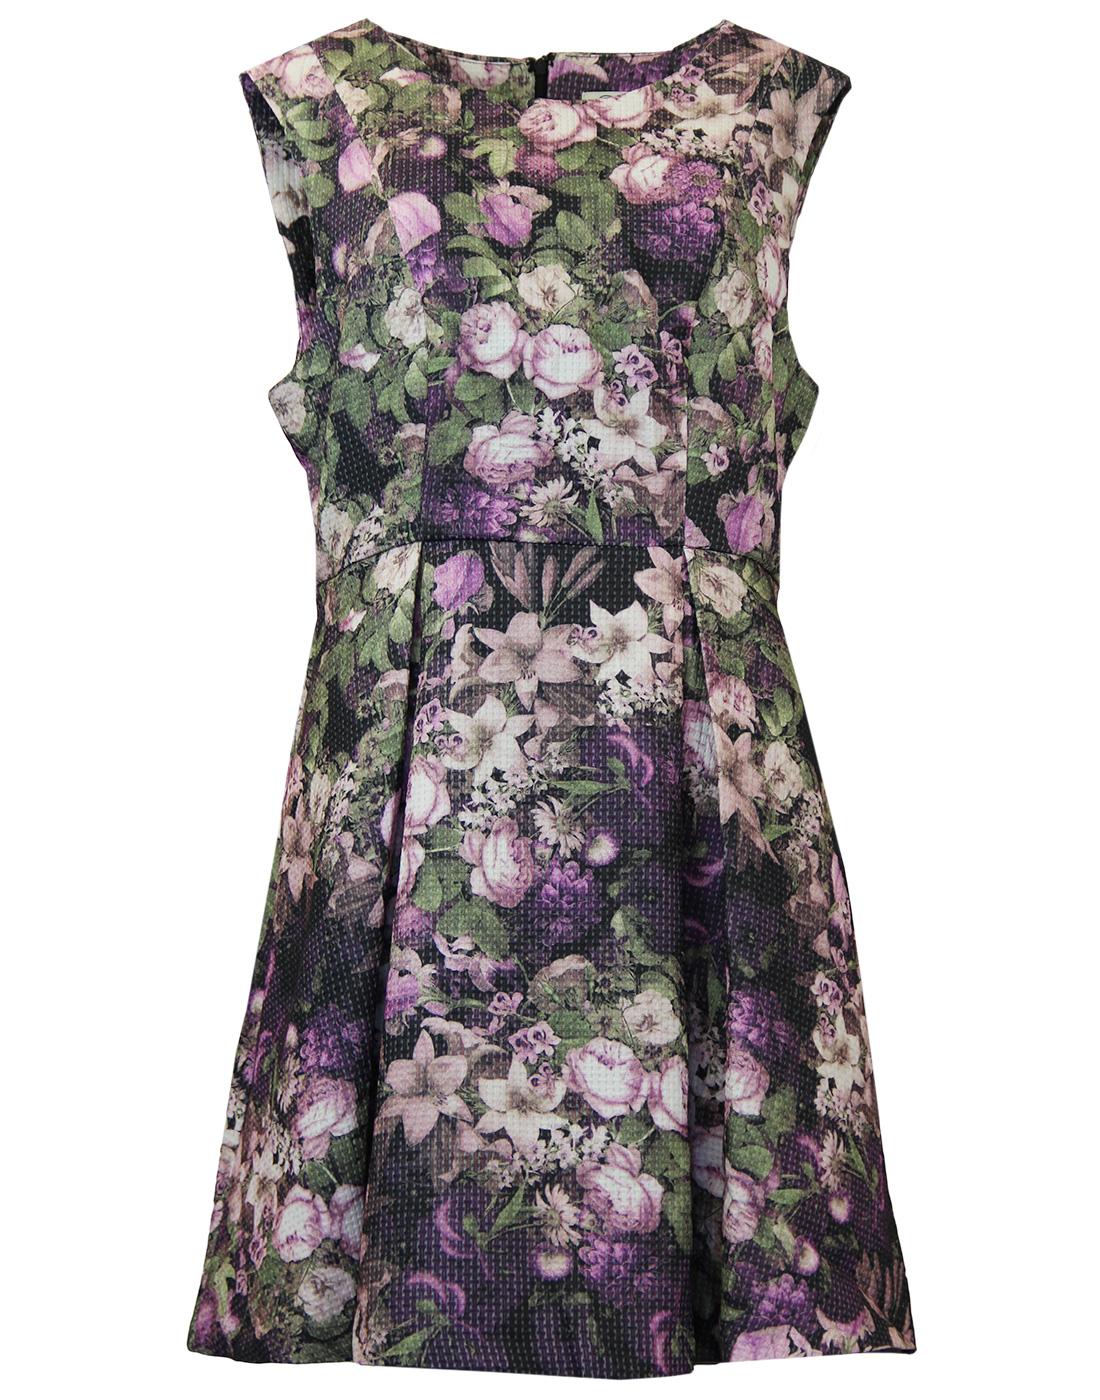 DARLING Sian Vintage Textured Floral Dress in Berry